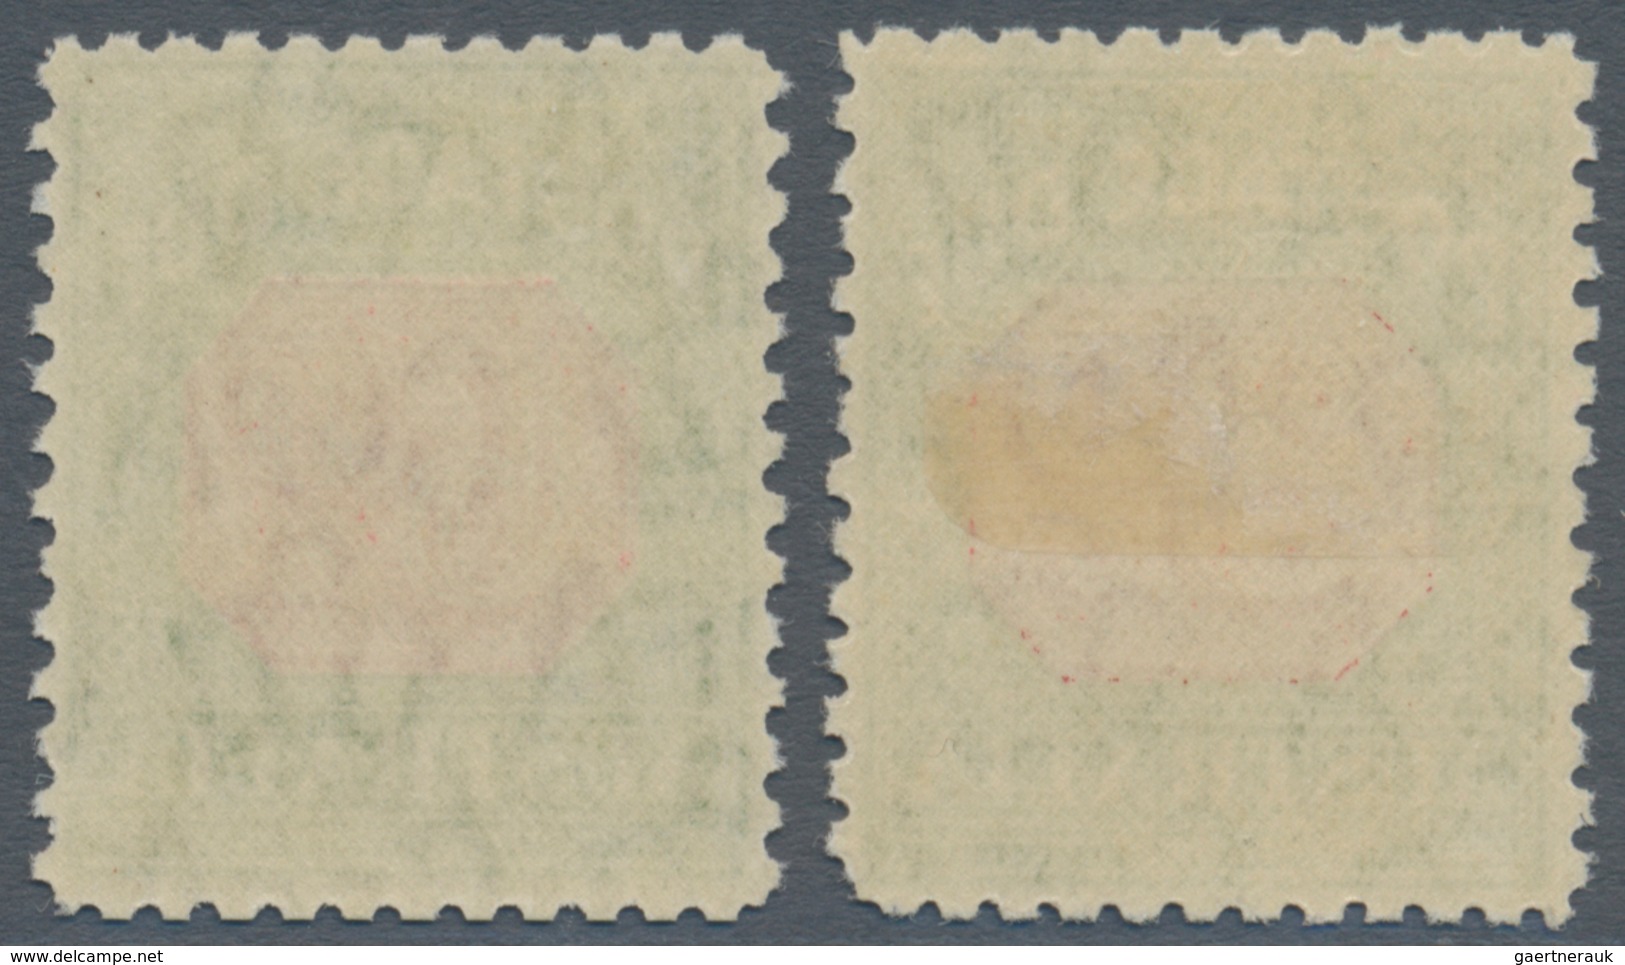 Australien - Portomarken: 1936, Postage Dues 3d. And 6d. Carmine-red/yellow-green With Wmk. Crown Ov - Port Dû (Taxe)